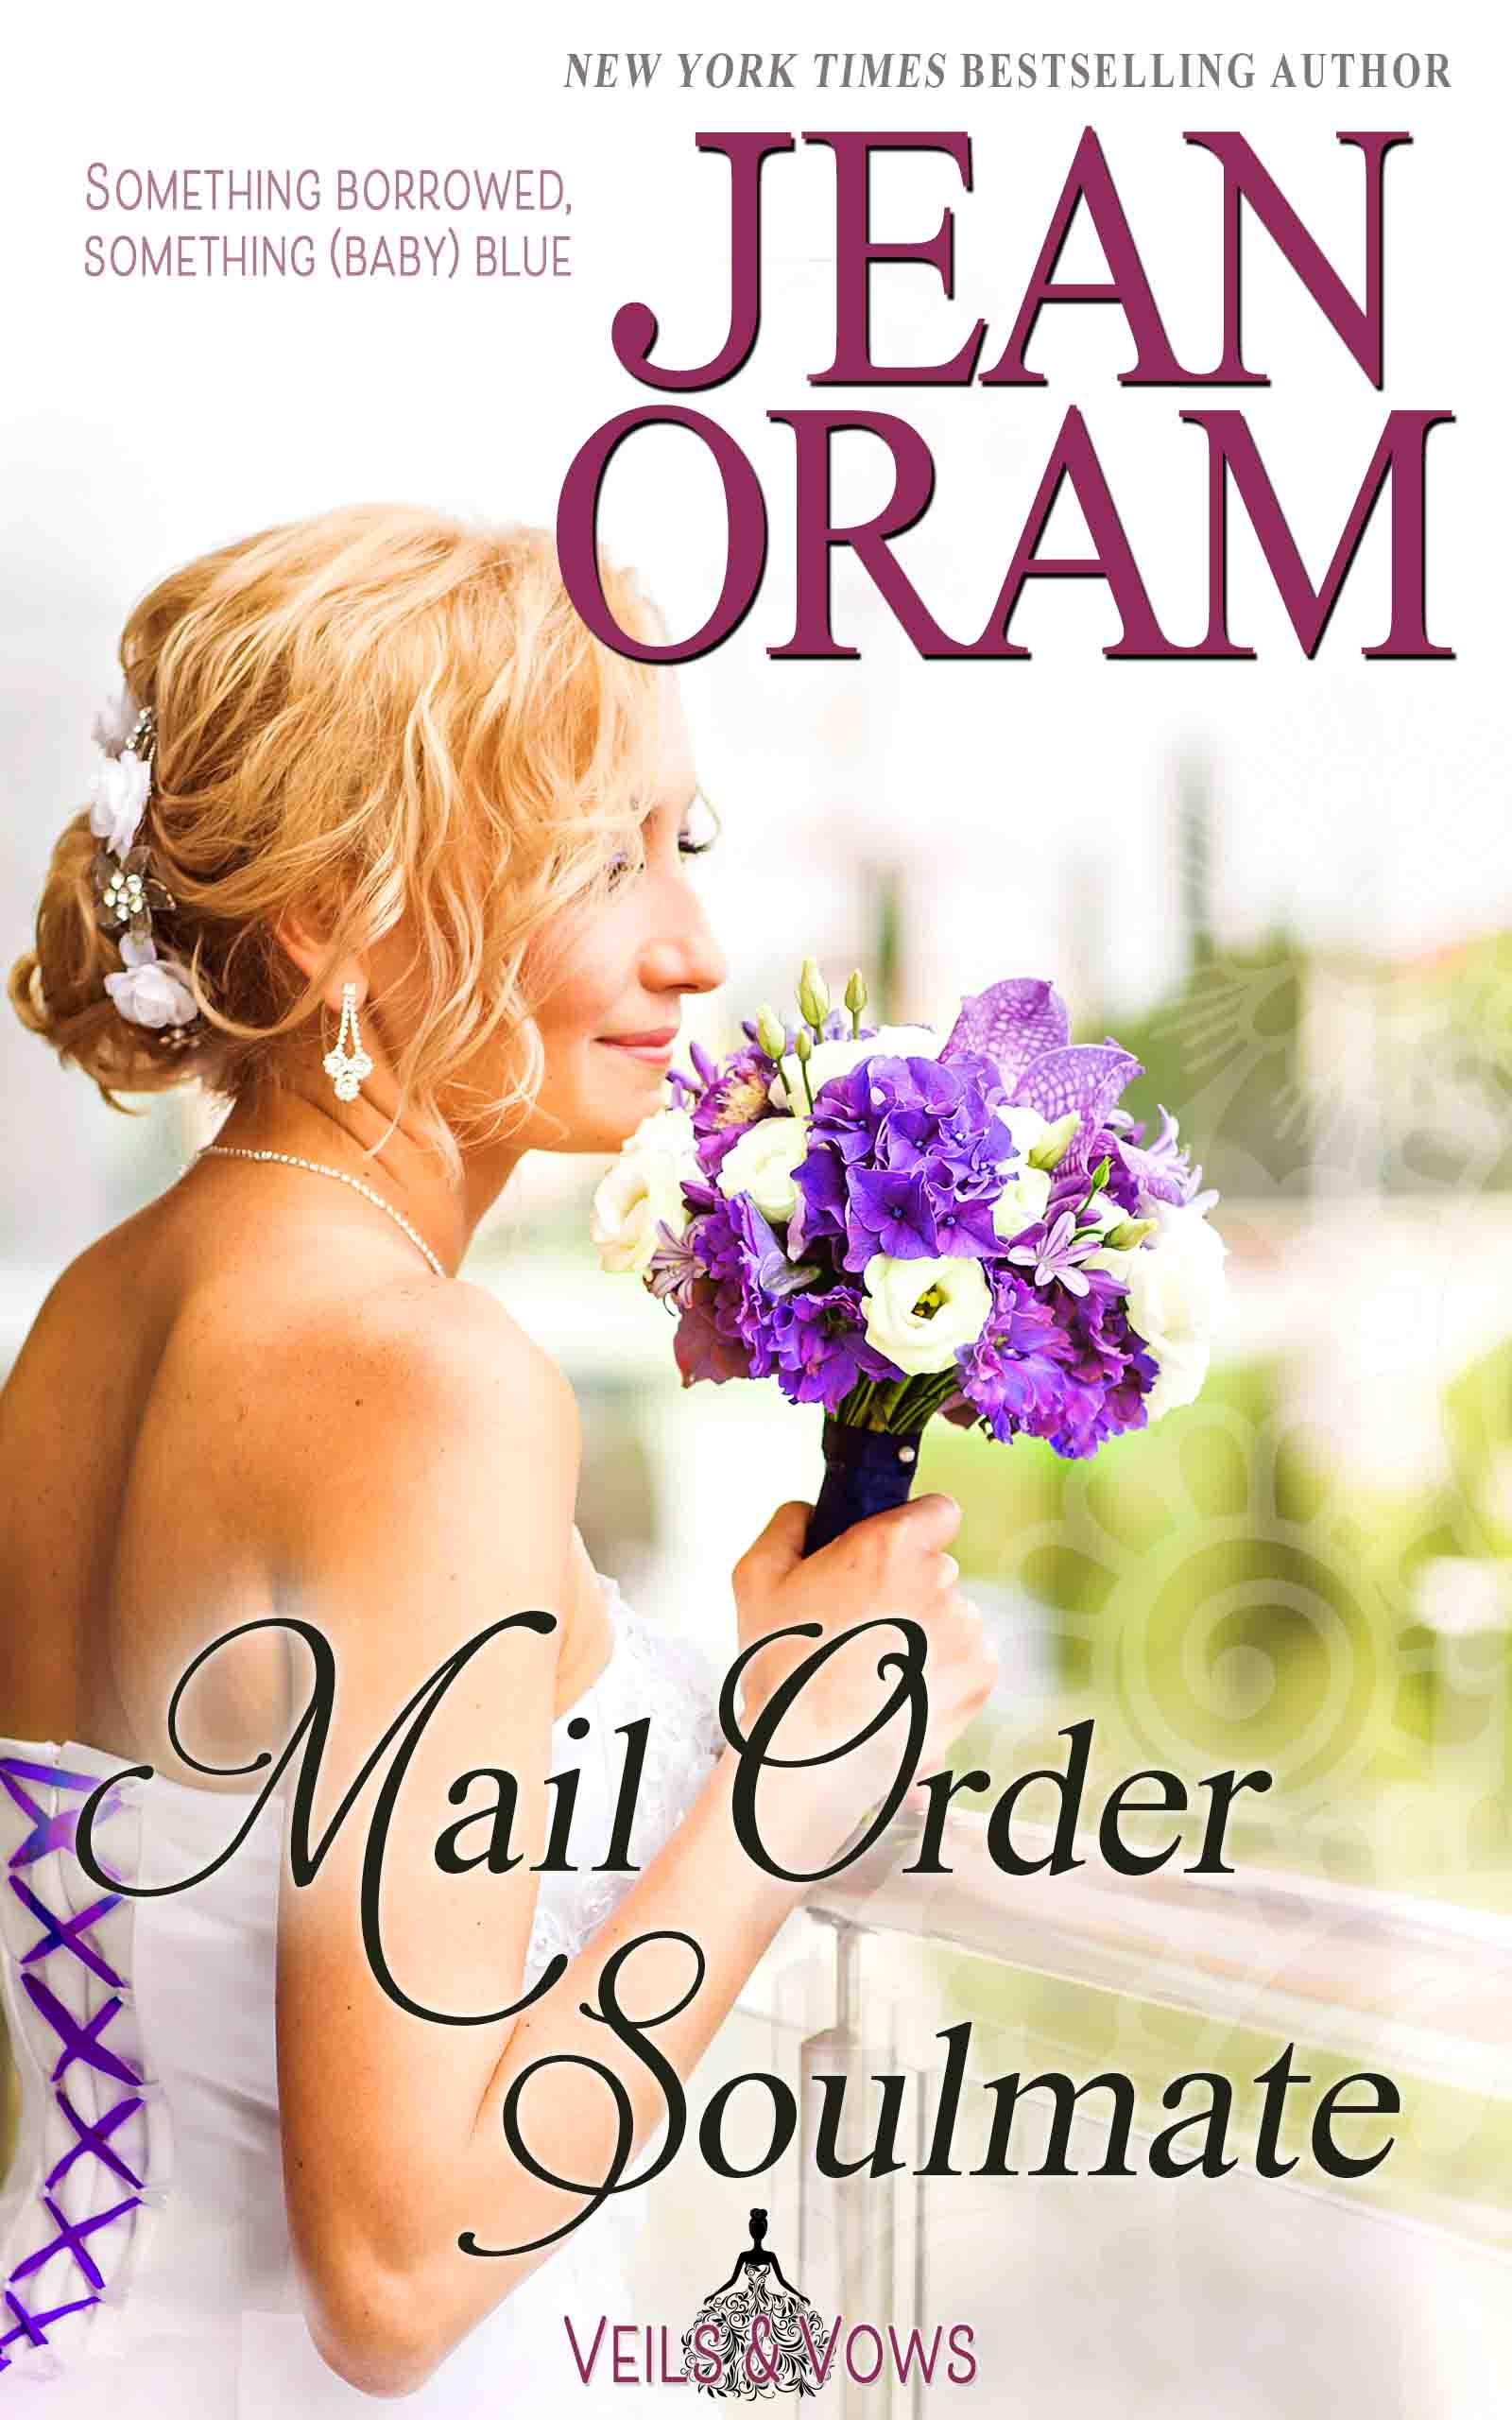 Mail Order Soulmate. A modern mail order bride romance. Book 6 in Jean Oram's Veils and Vows series.